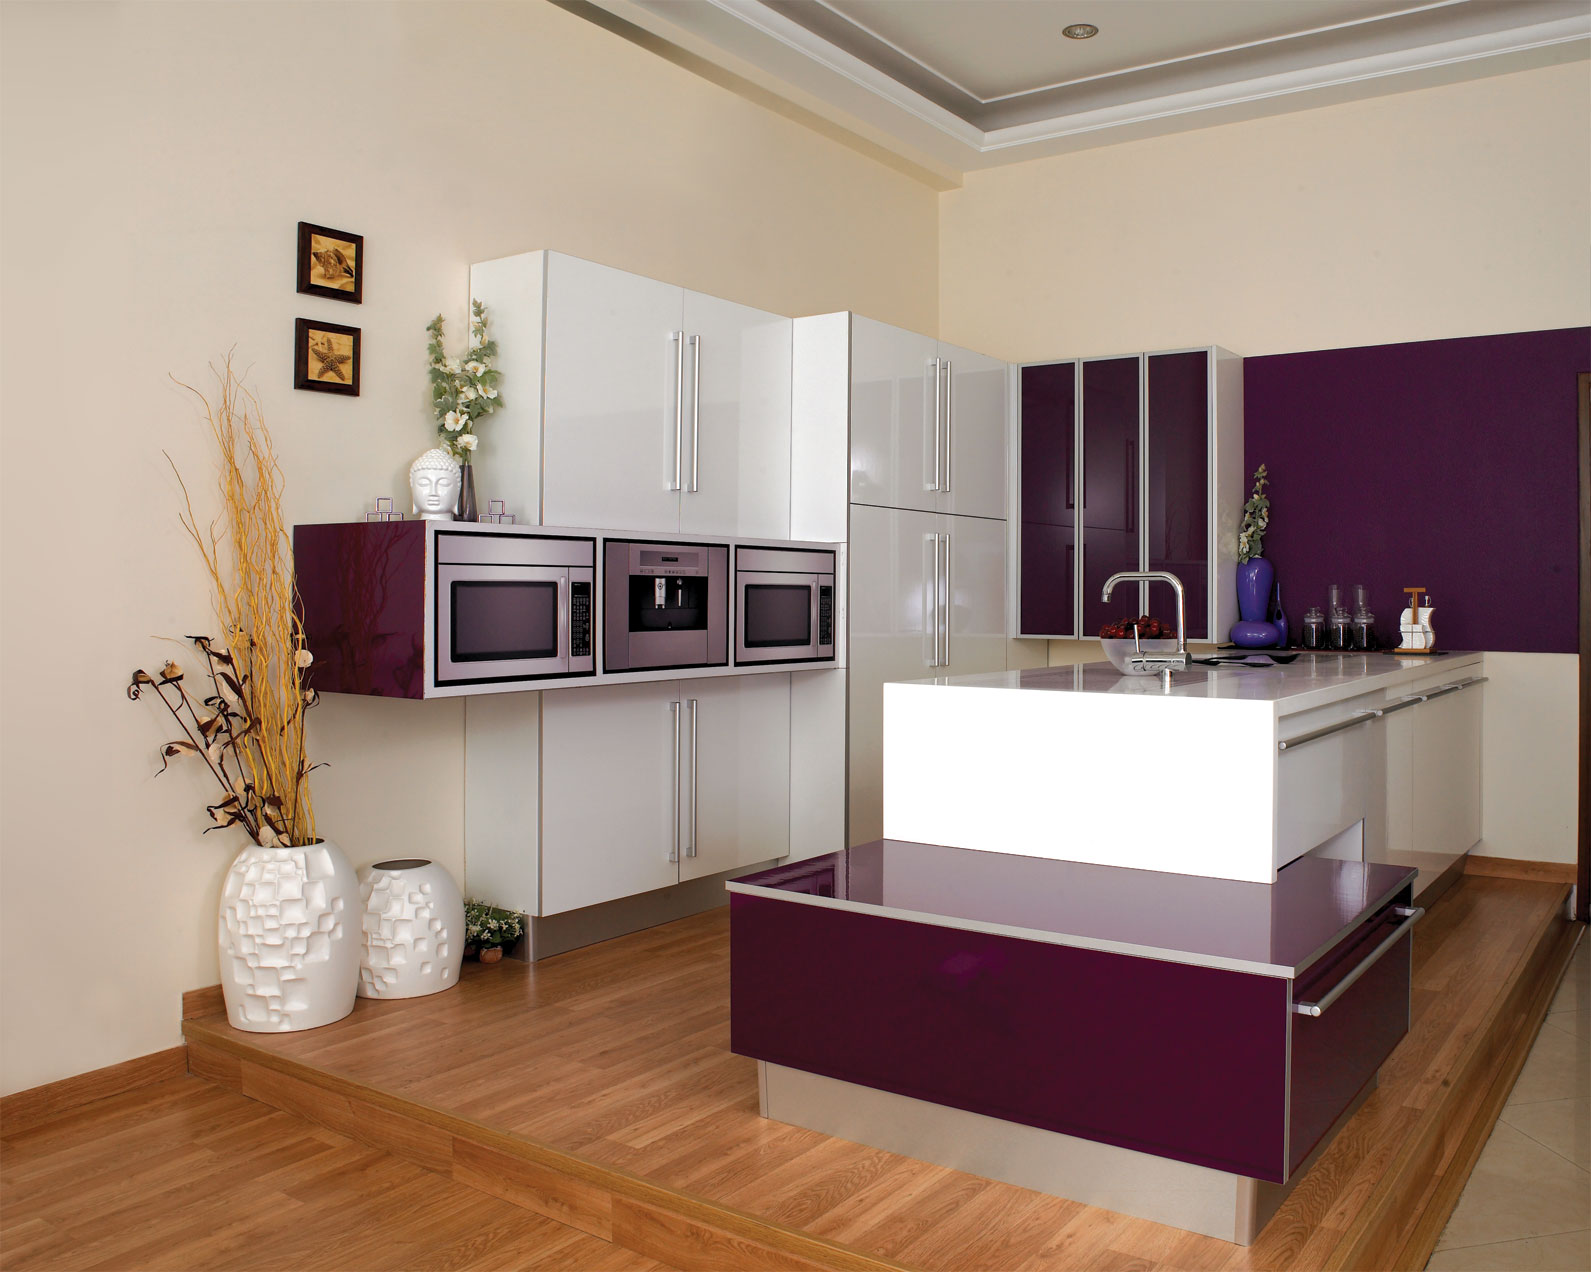 Modular Kitchens A Trend In India How To Maintain Modular